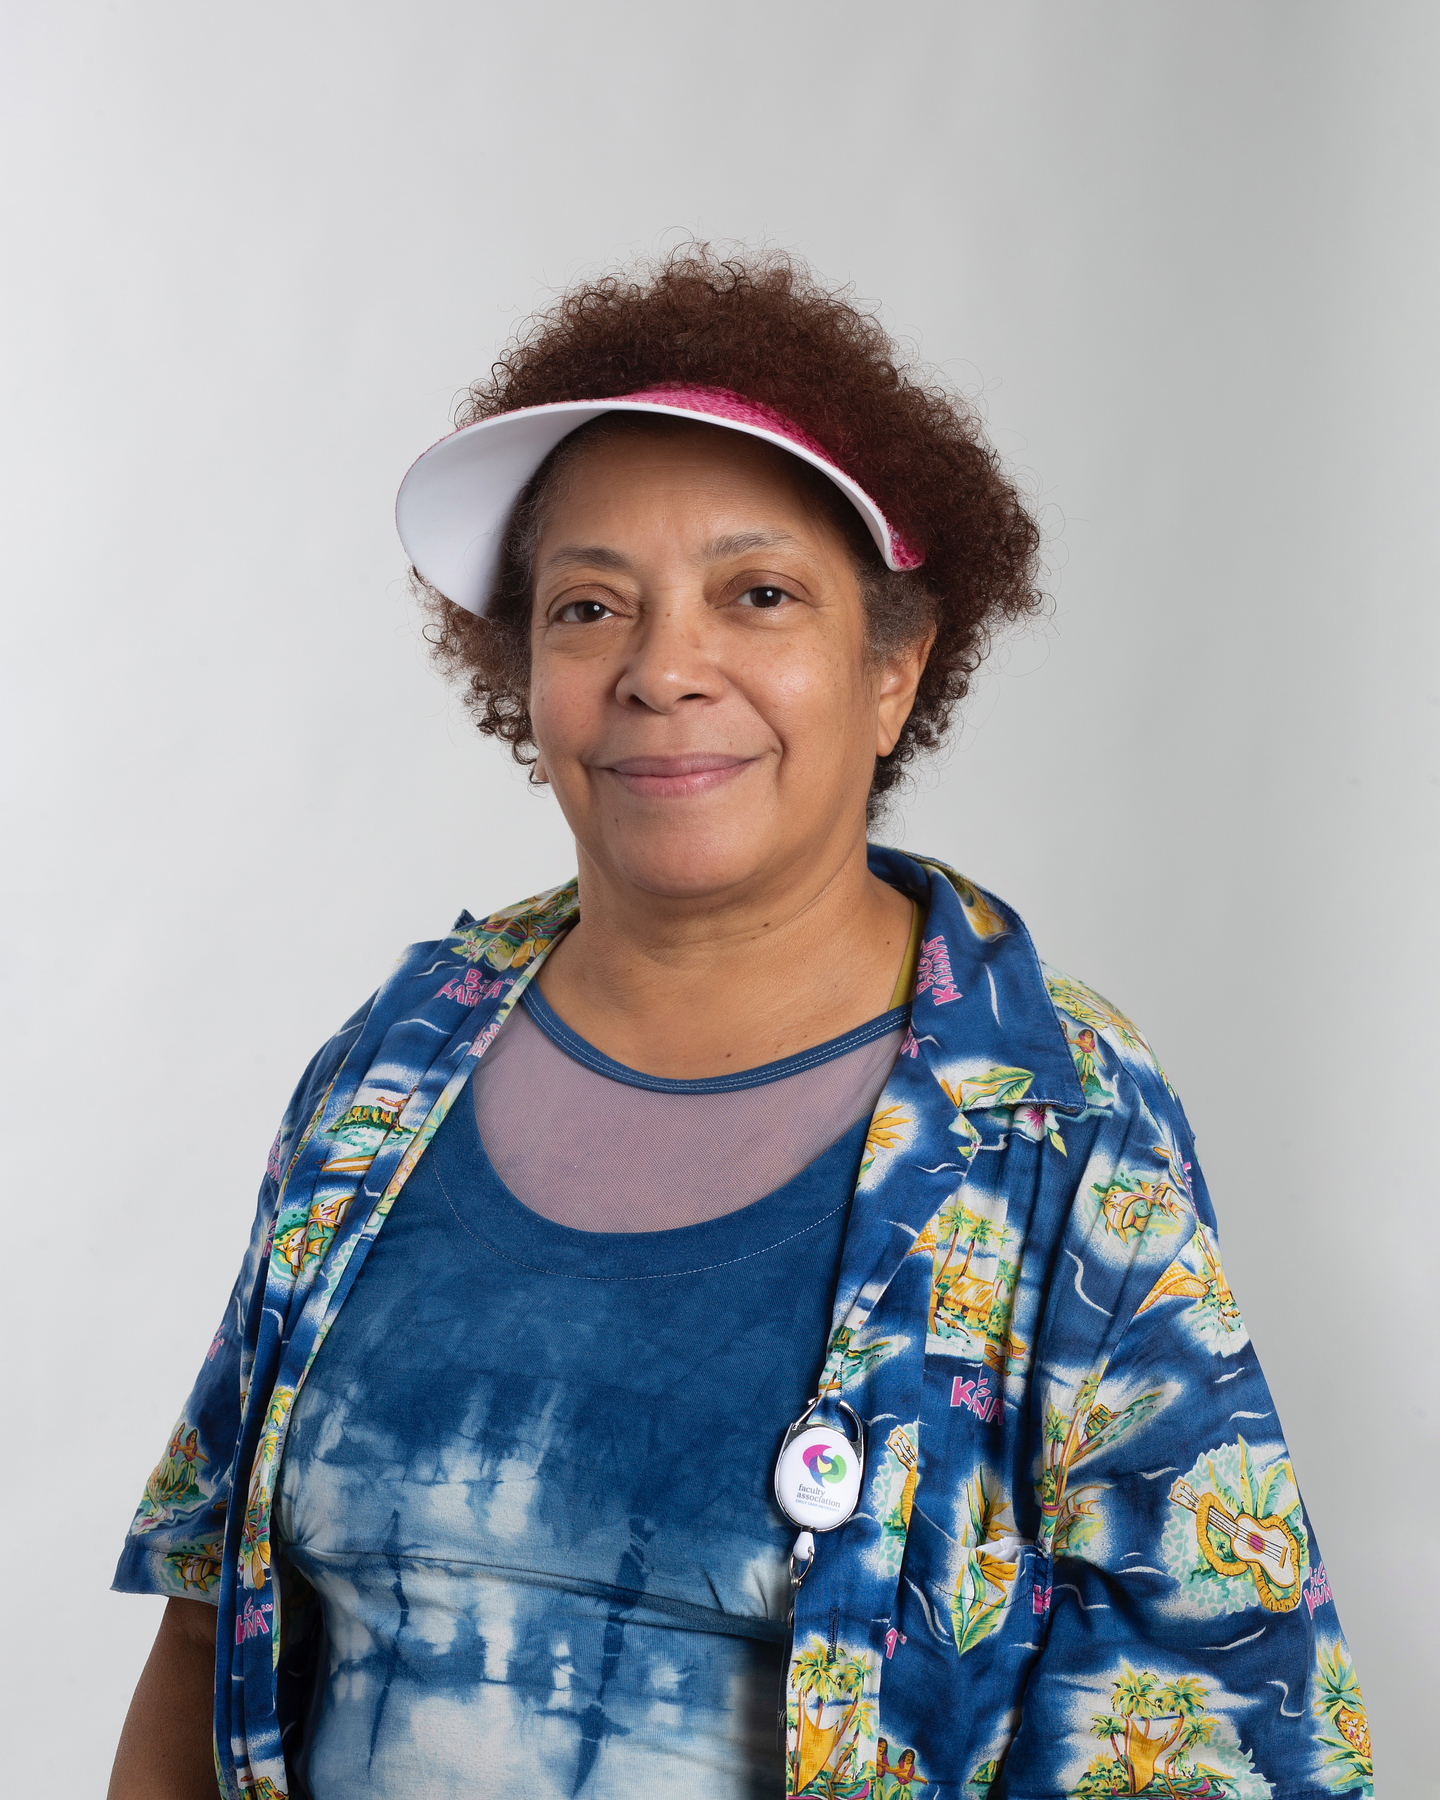 Smiling, Valerie Walker stands in front of a white background. She wears a short-sleeve shirt with Hawaiian iconography layered on top of an indigo dyed top. A hot pink visor peeks out from her short curly auburn hair. 